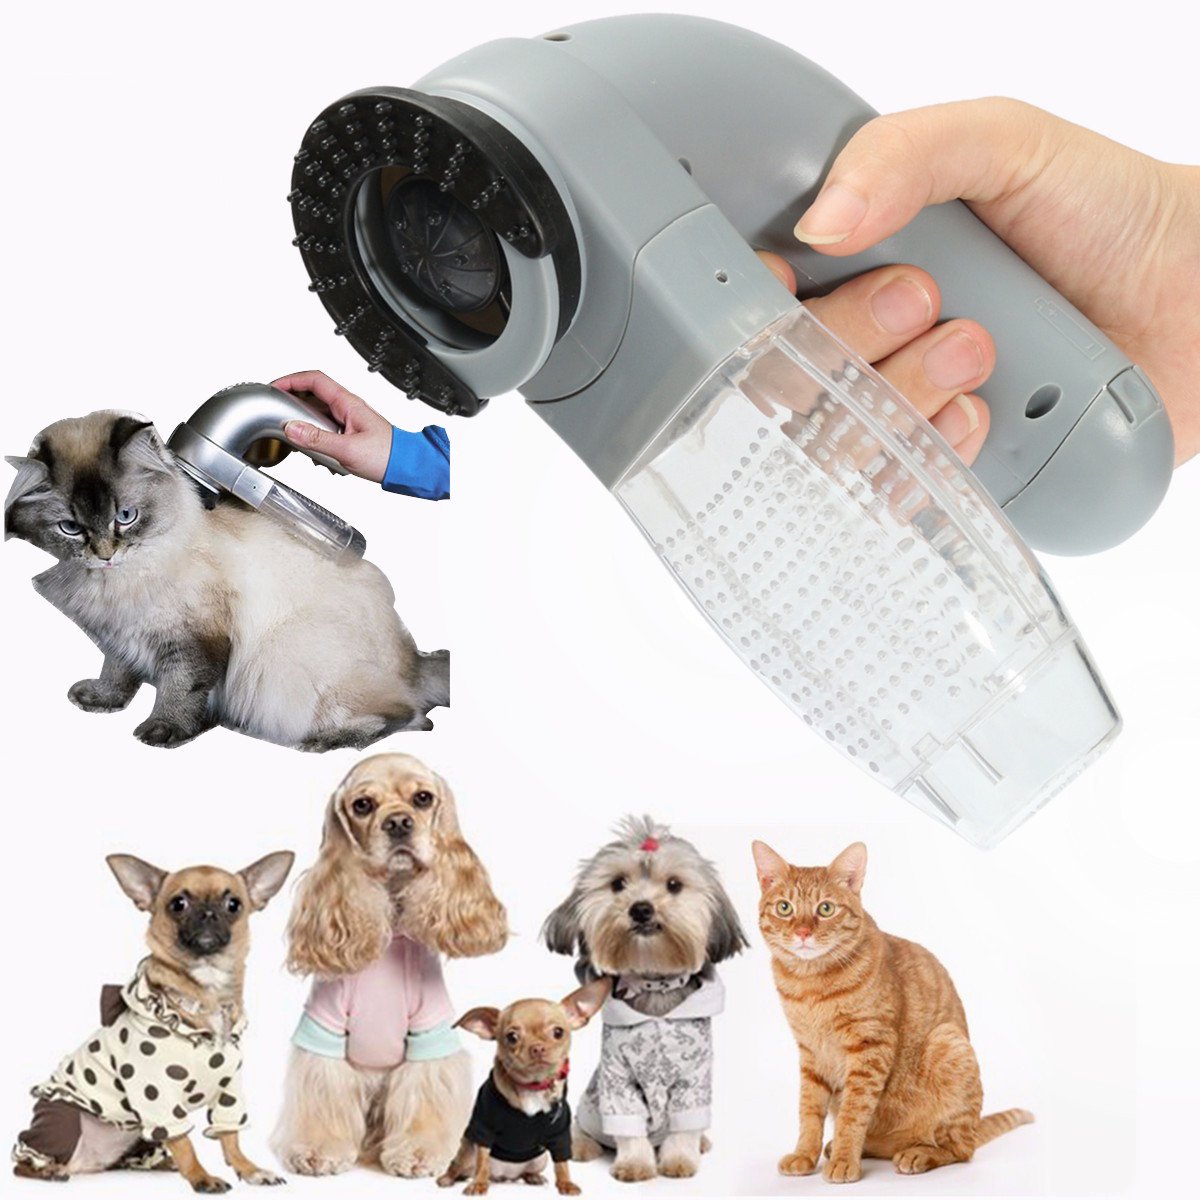 Dog Cat Pet Electric Hair Grooming Vacuum Cleaner, Fur Shedding Remover Trimmer Brush Comb